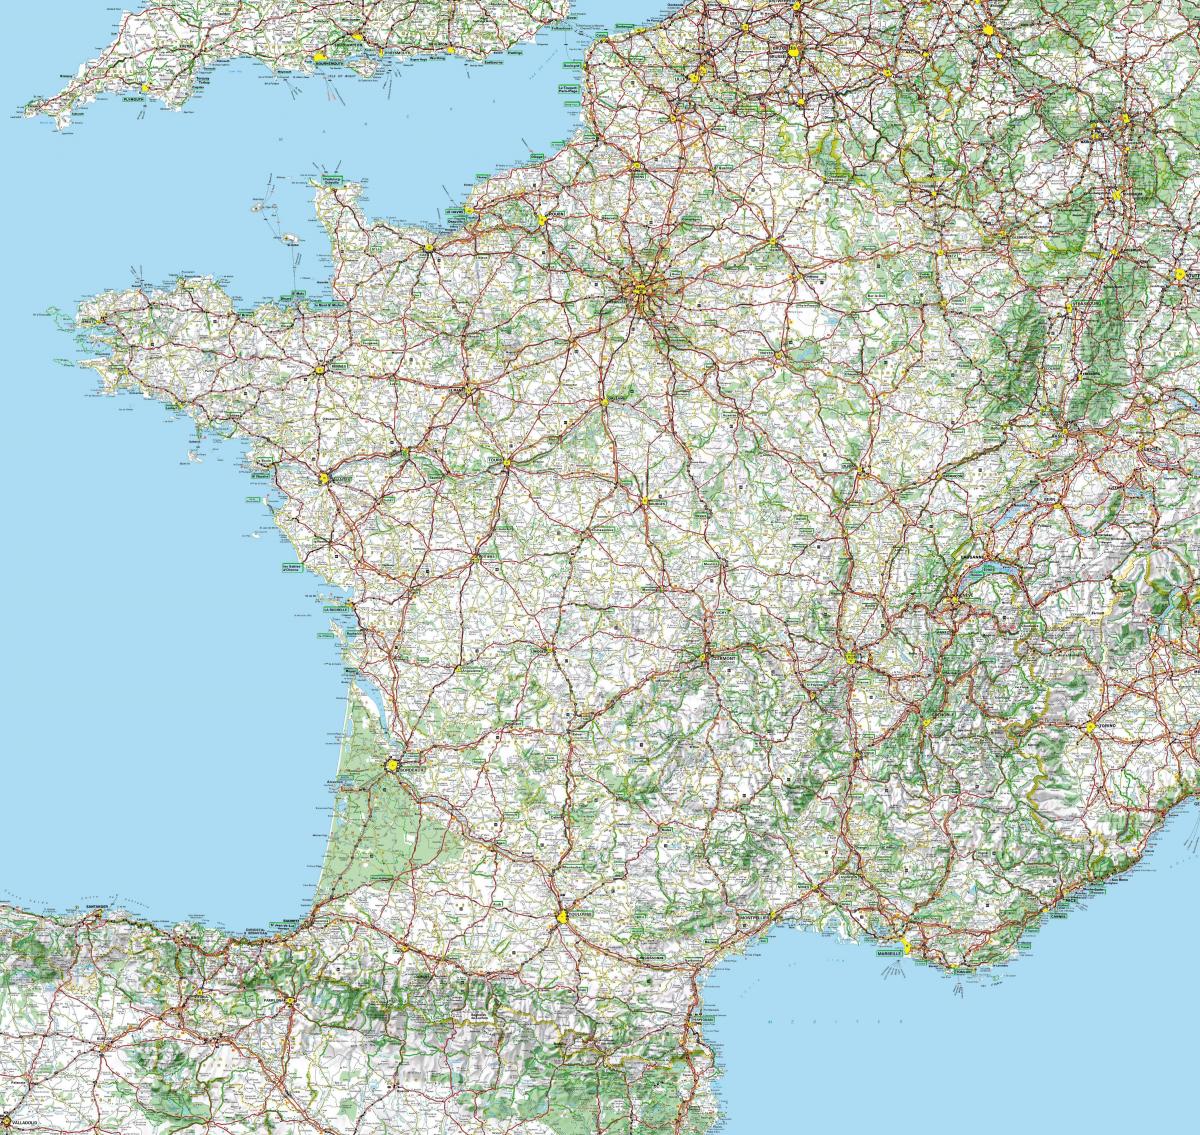 Driving map of France